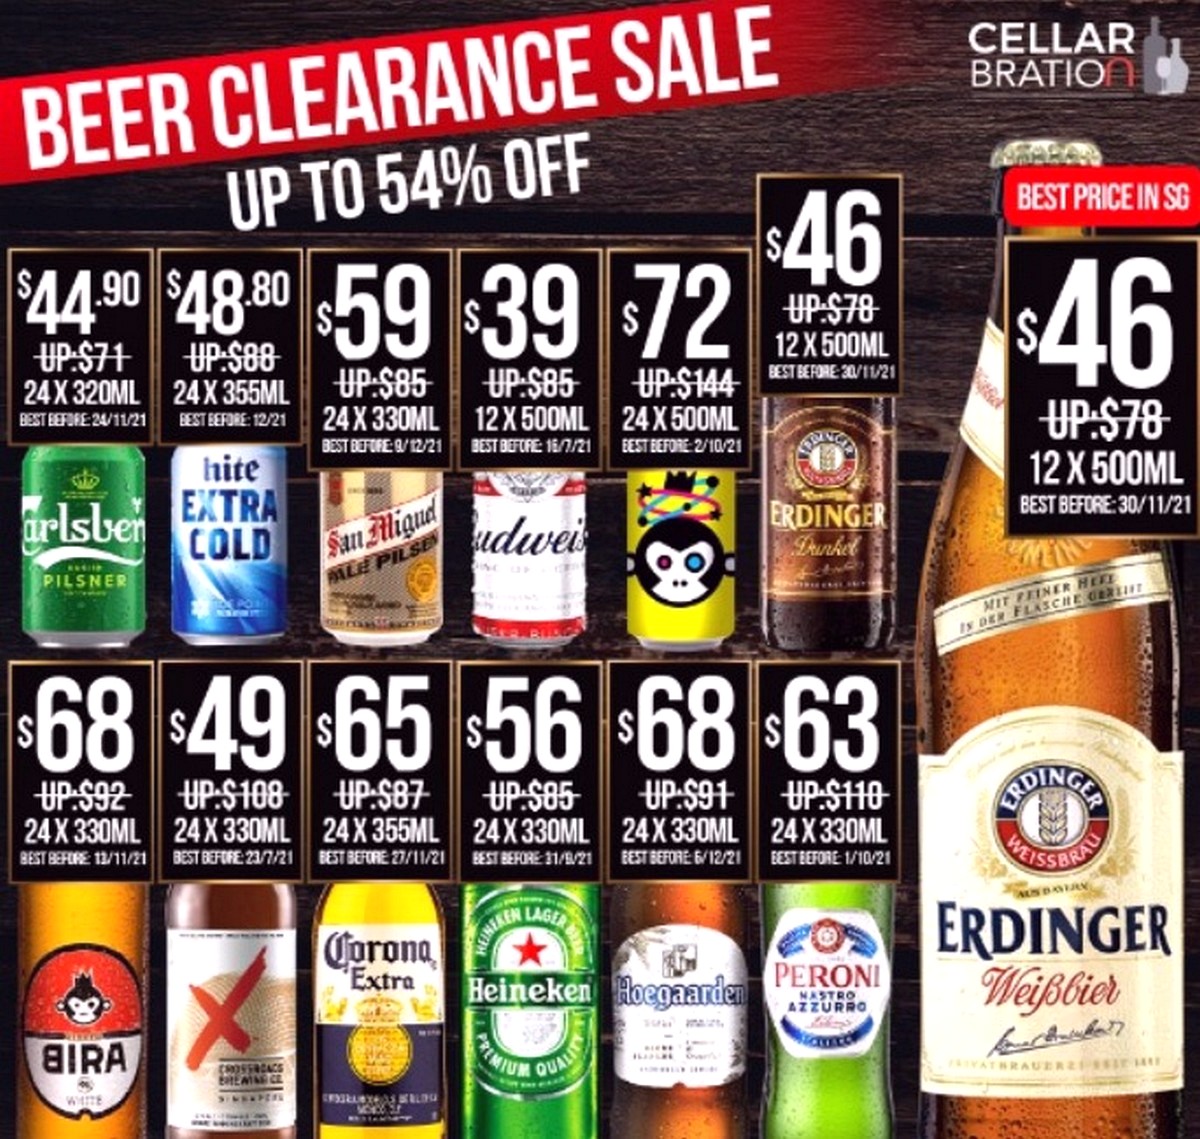 Cellarbration-Warehouse-Sale-Clearance-2021-Singapore-Wine-Beer-Discounts-Alcohol-Drinks-Beverages 28 Jun-31 Jul 2021: Cellarbration’s Warehouse Sale! Beer Clearance Sale Up to 54% OFF!